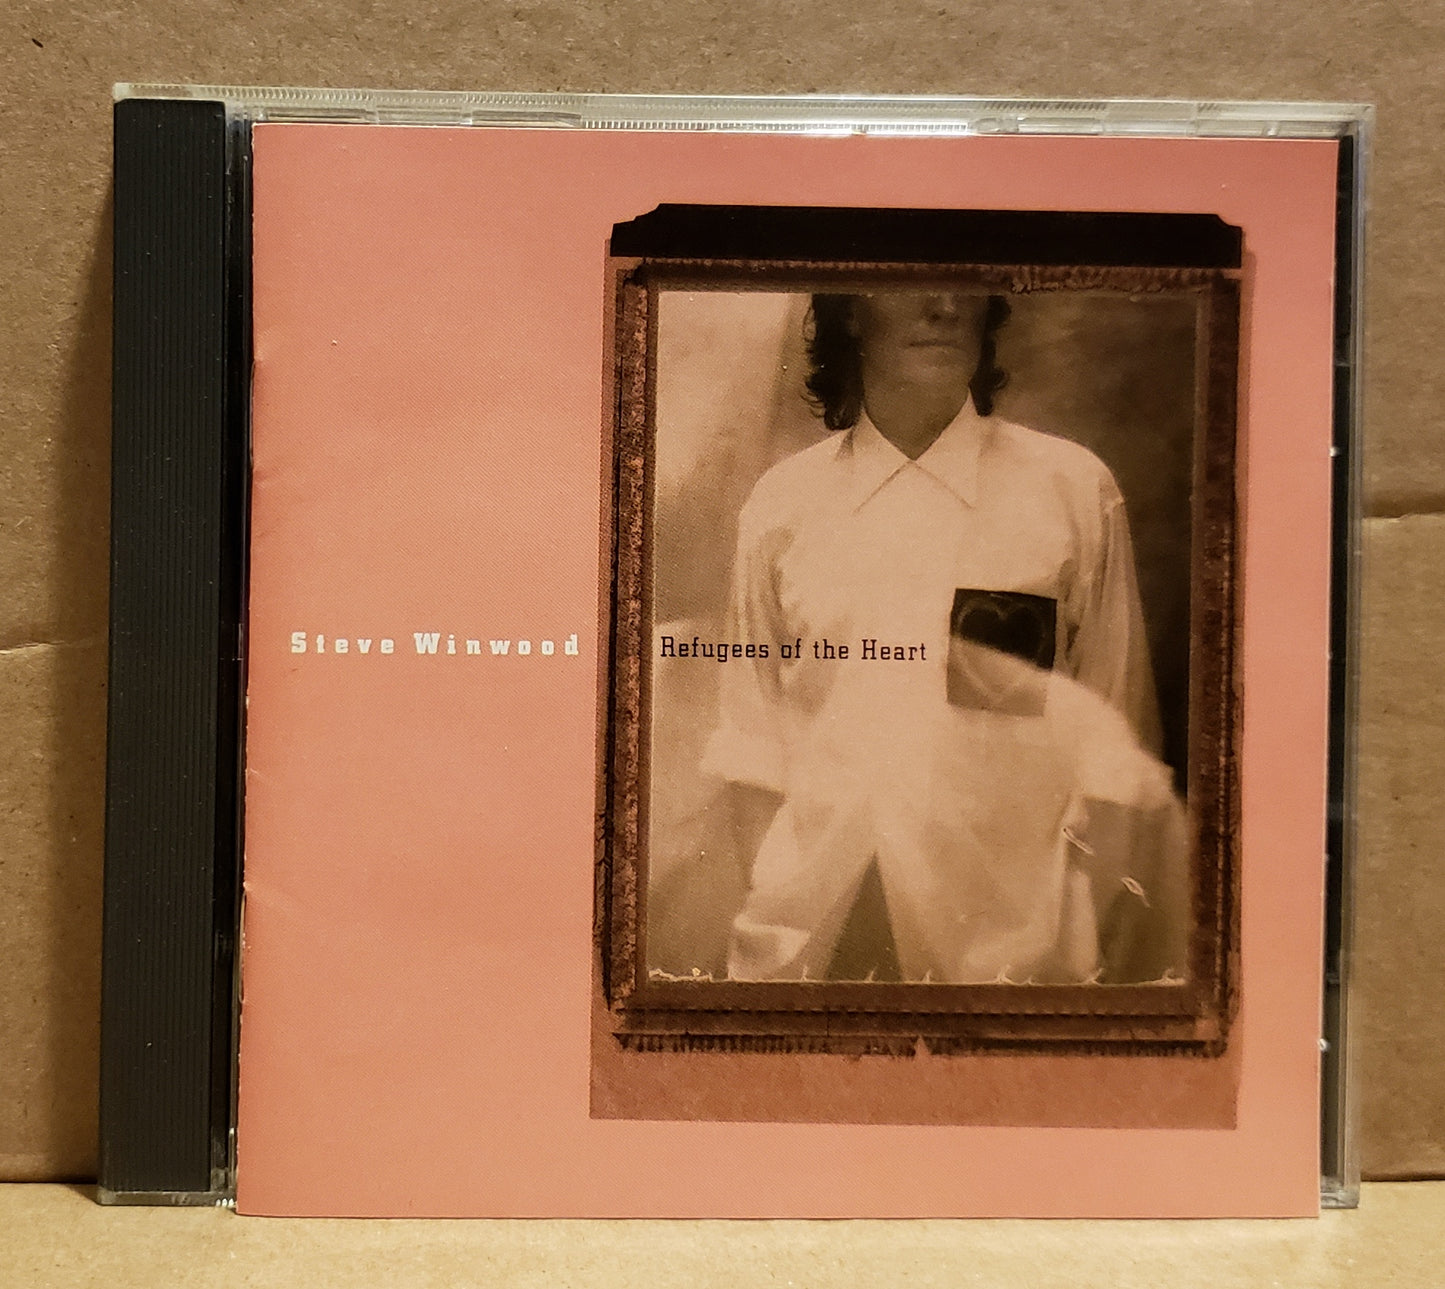 Steve Winwood - Refugees of the Heart [1990 Club Edition] [Used CD]